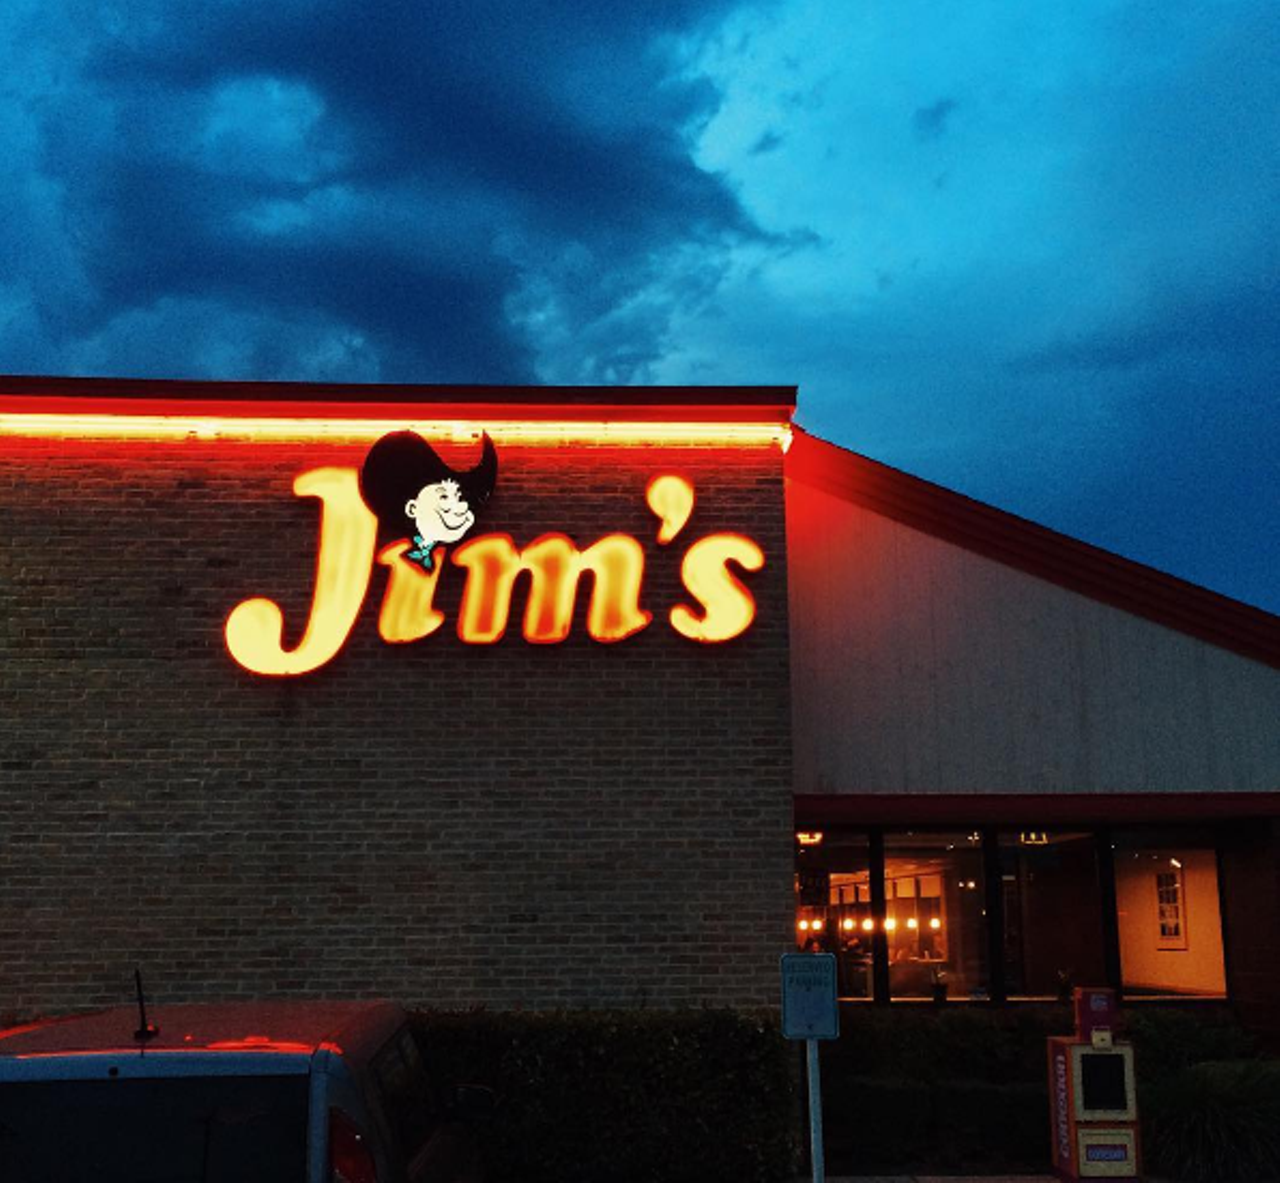 Jim&#146;s
multiple locations, jimsrestaurants.com
Love it or hate it, Jim&#146;s is the San Antonio staple that will satisfy any late-night craving. With most locations open 24 hours, there&#146;s no way you can go wrong with a trip this old SA standby.
Photo via Instagram,  lookingforangelaska